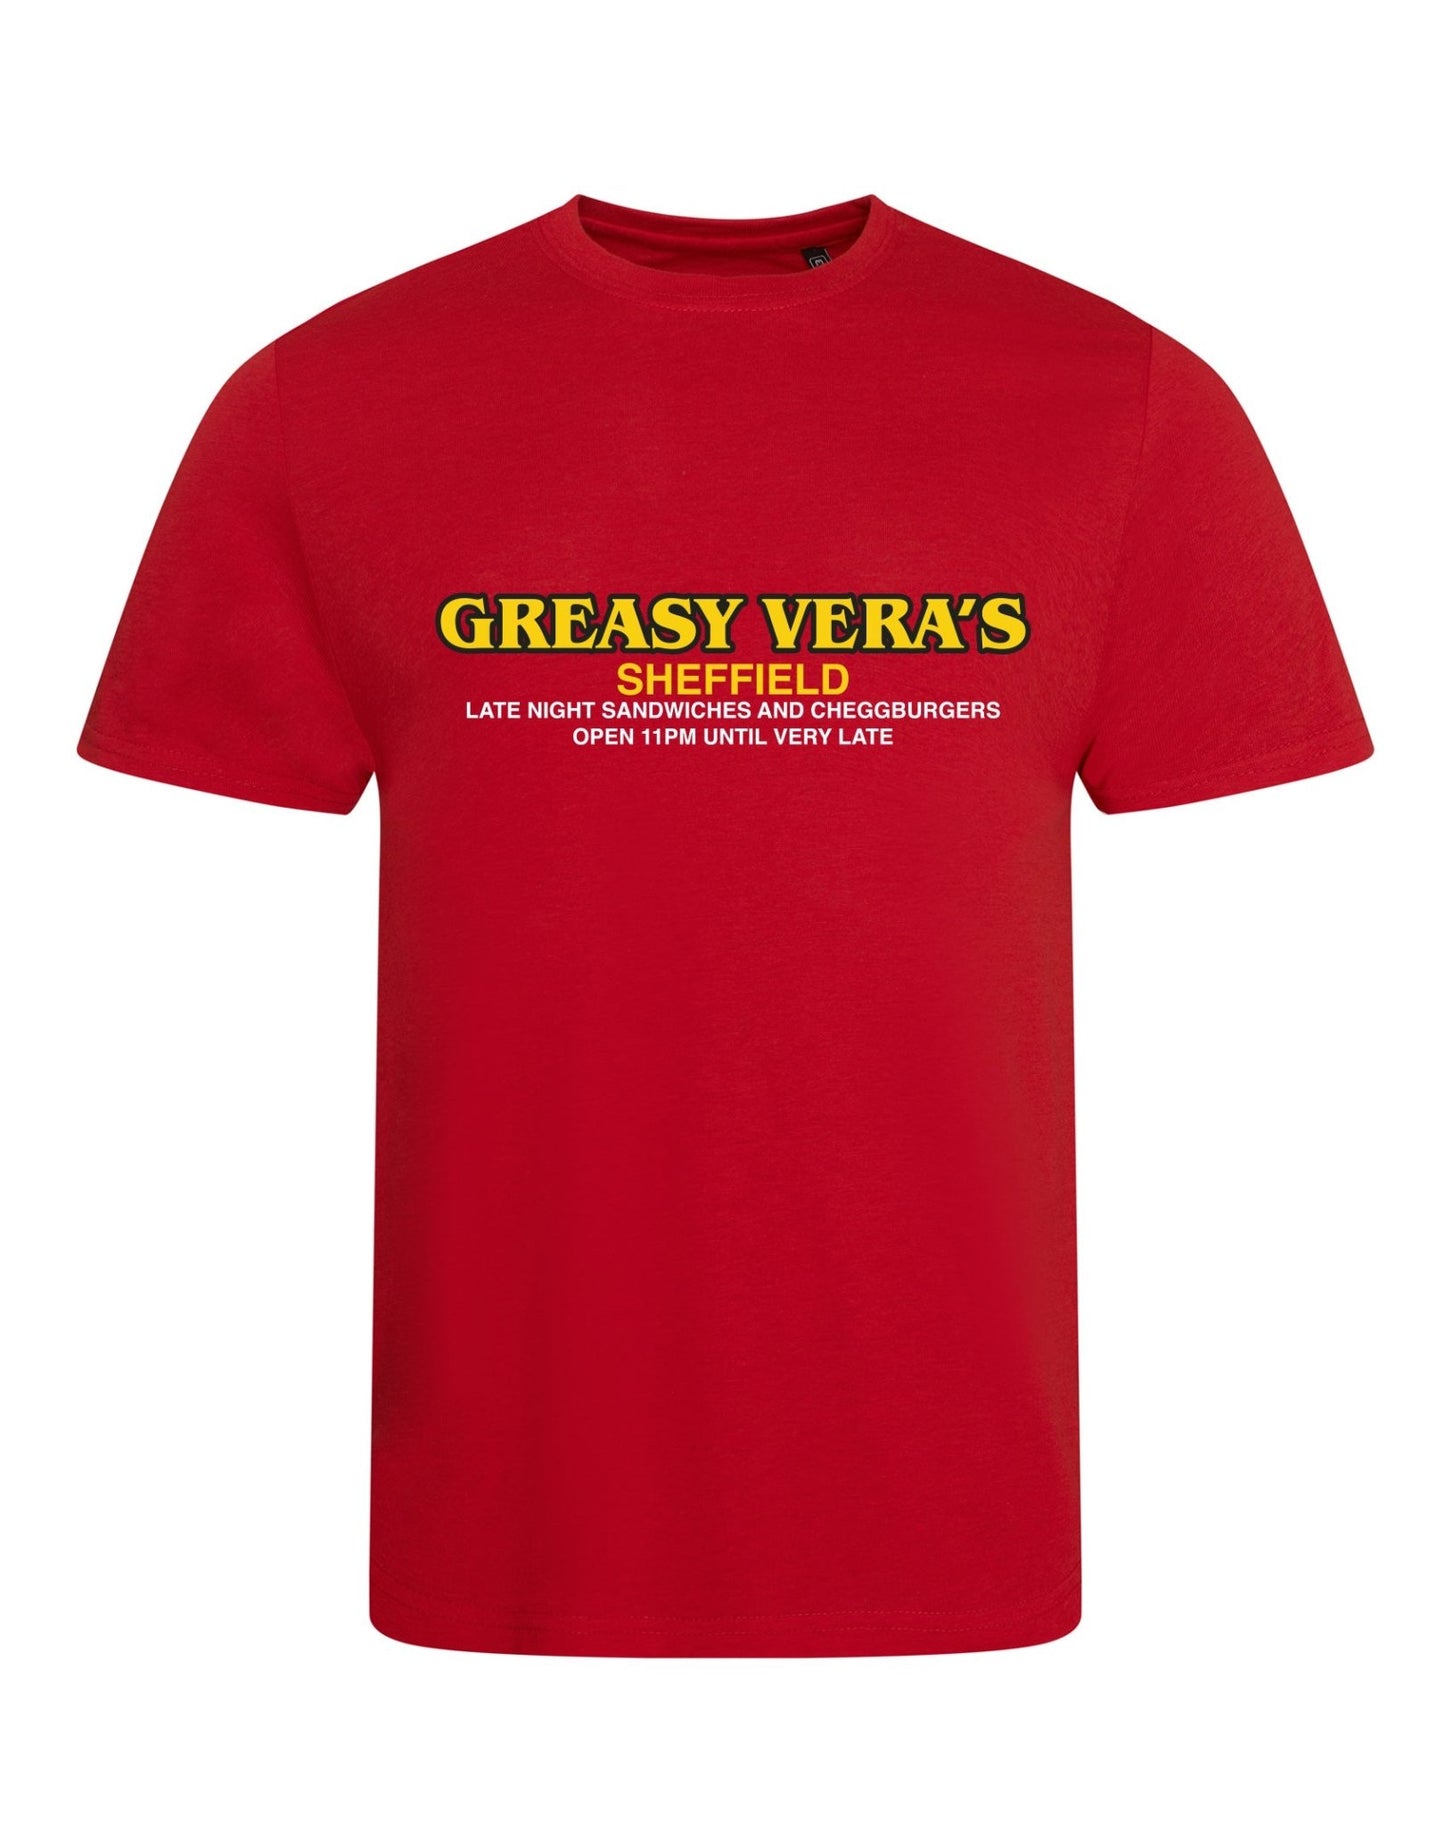 Greasy Vera's unisex fit T-shirt - various colours - Dirty Stop Outs